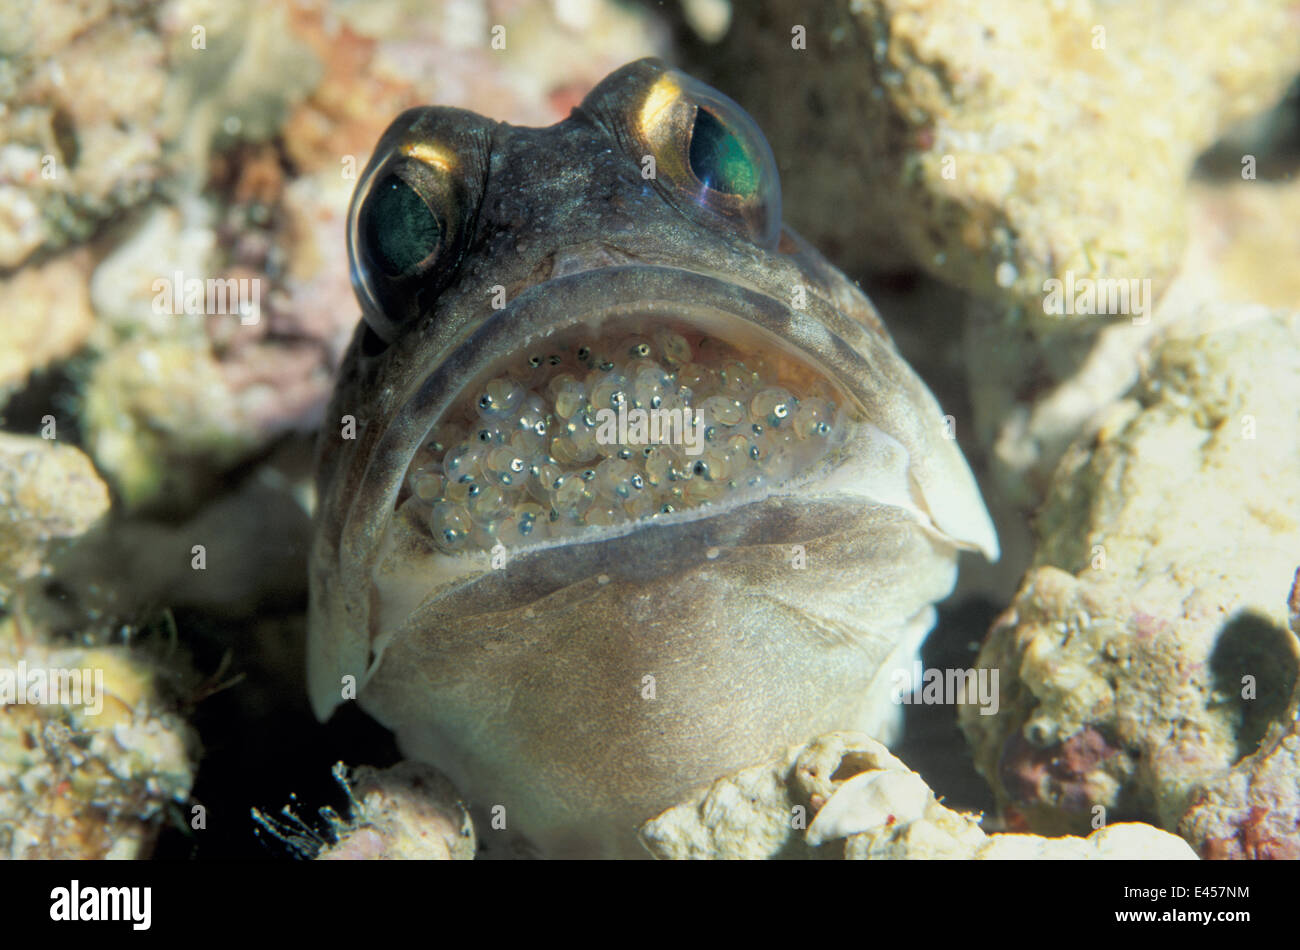 Gold specs jawfish male incubating eggs in mouth, unable to feed {Opistognathus sp} Sangalakki, Indonesia Stock Photo